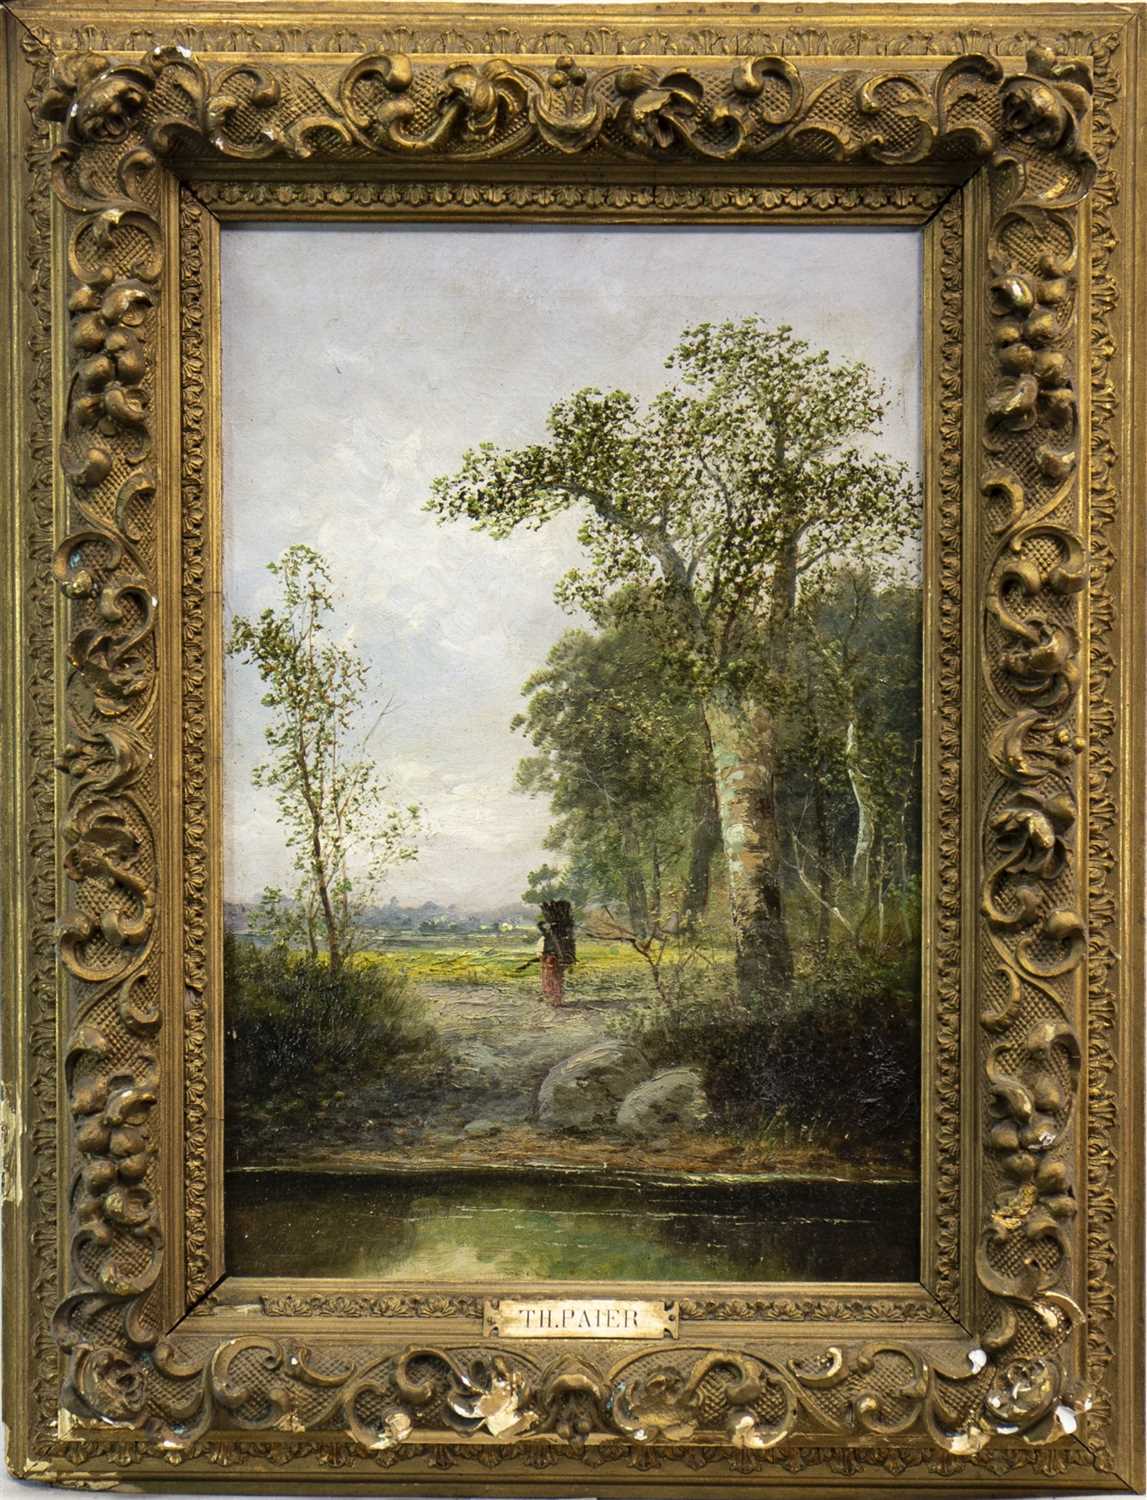 Lot 632 - RURAL SCENE WITH FIGURE, AN OIL BY TH PAIER